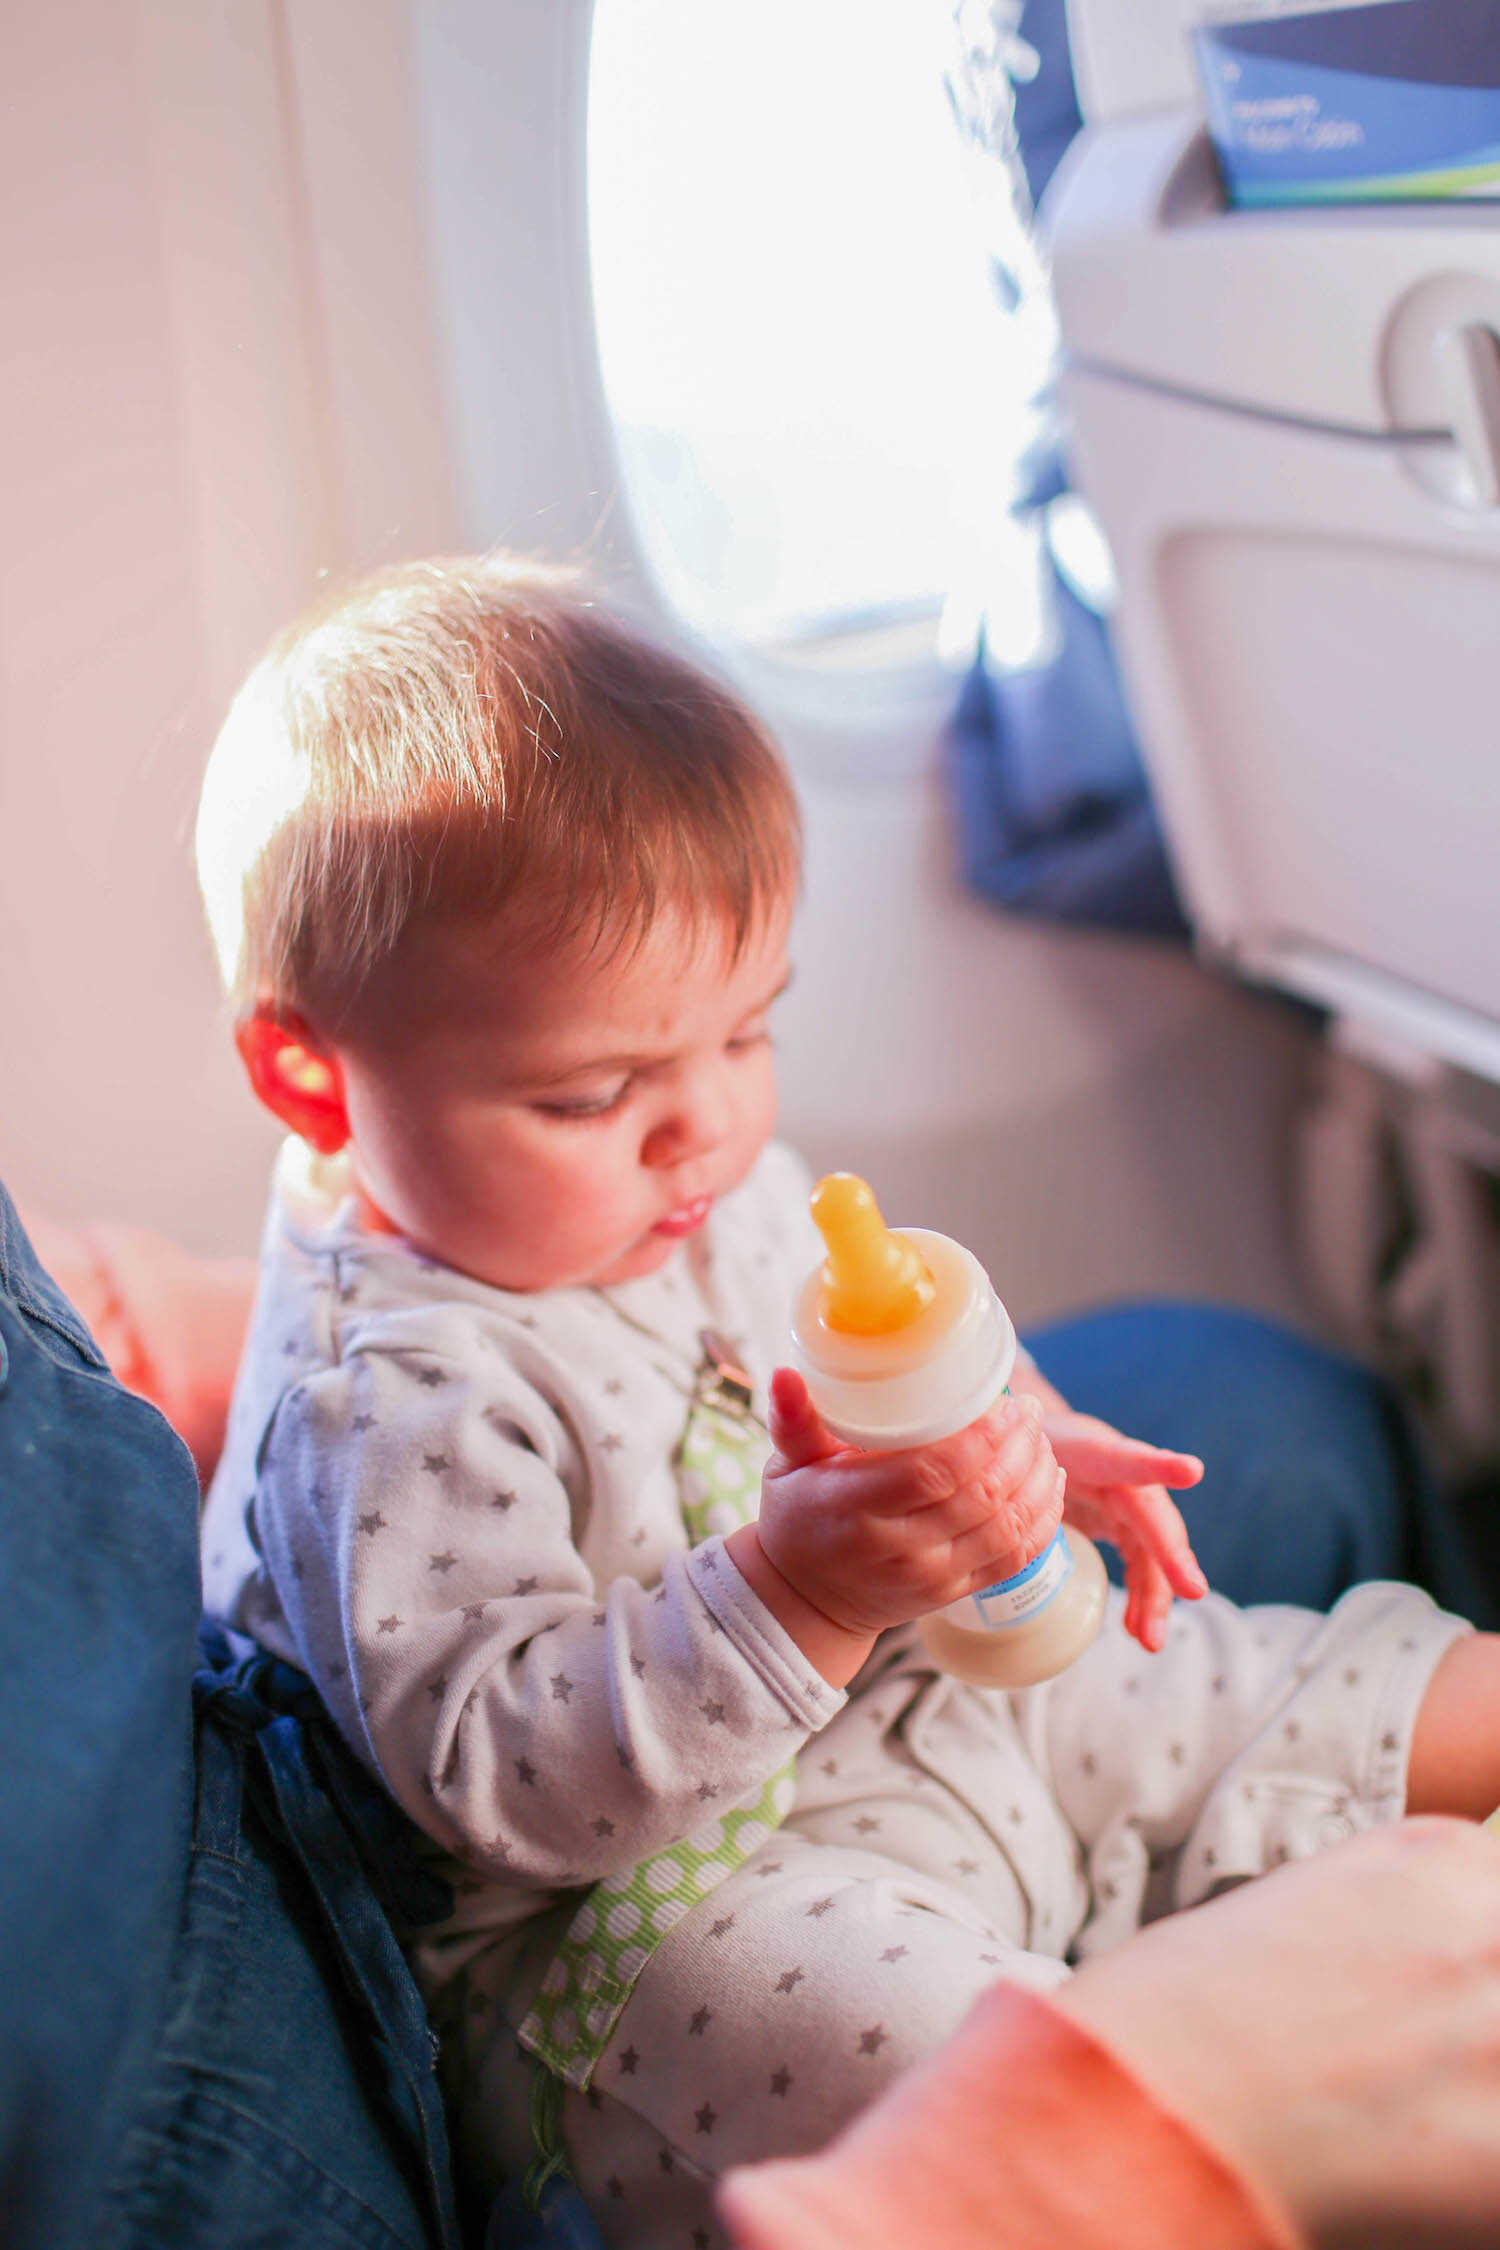 Baby Scout holding her Ready-to-Feed formula bottle on the airplane.